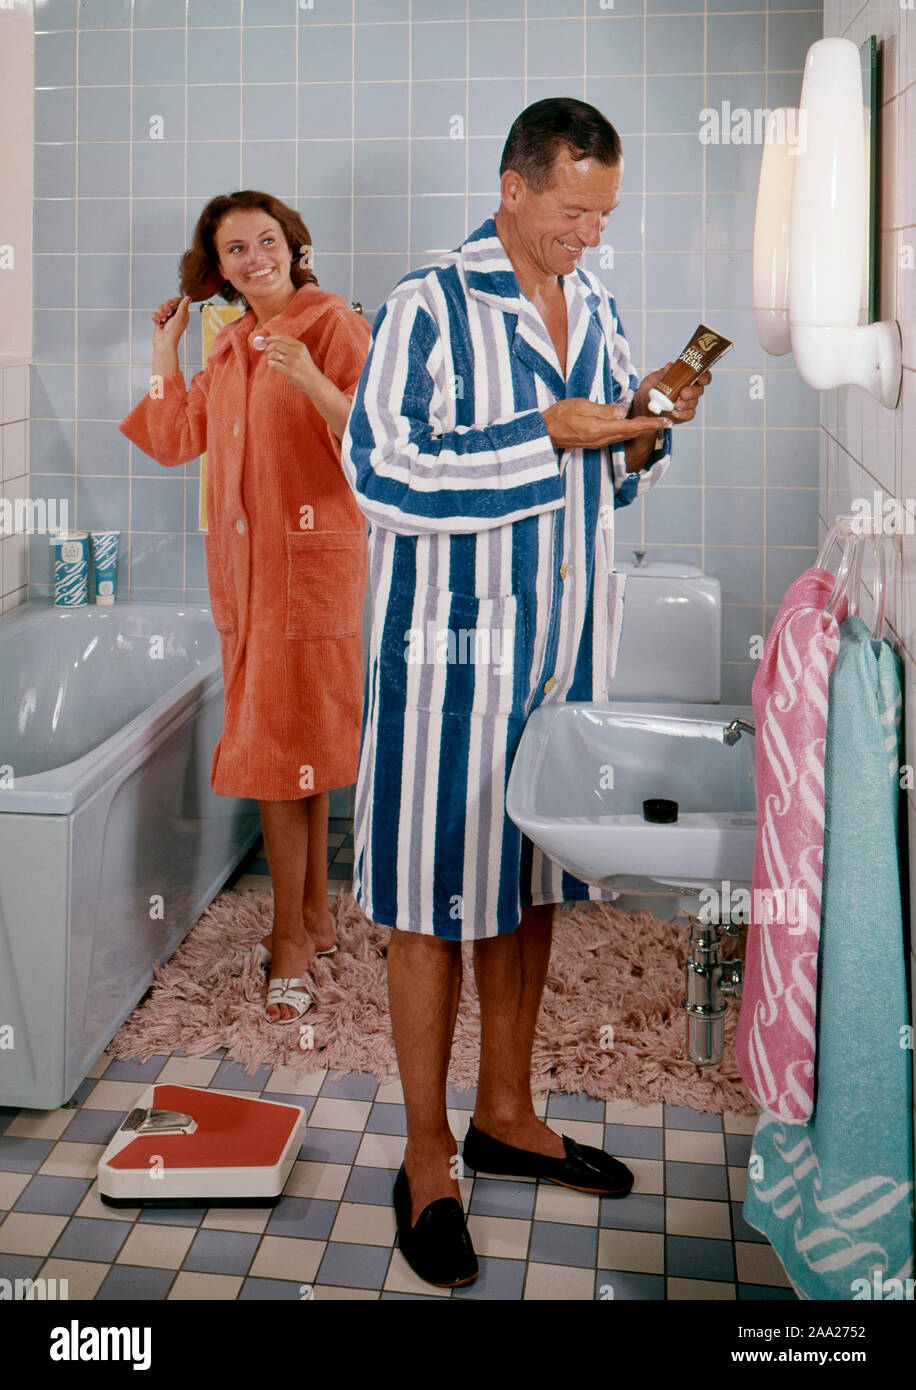 Bathroom of the 1960s. A couple in their typical 1960s bathroom. She in a orange bathrobe brushing her hair. Stock Photo